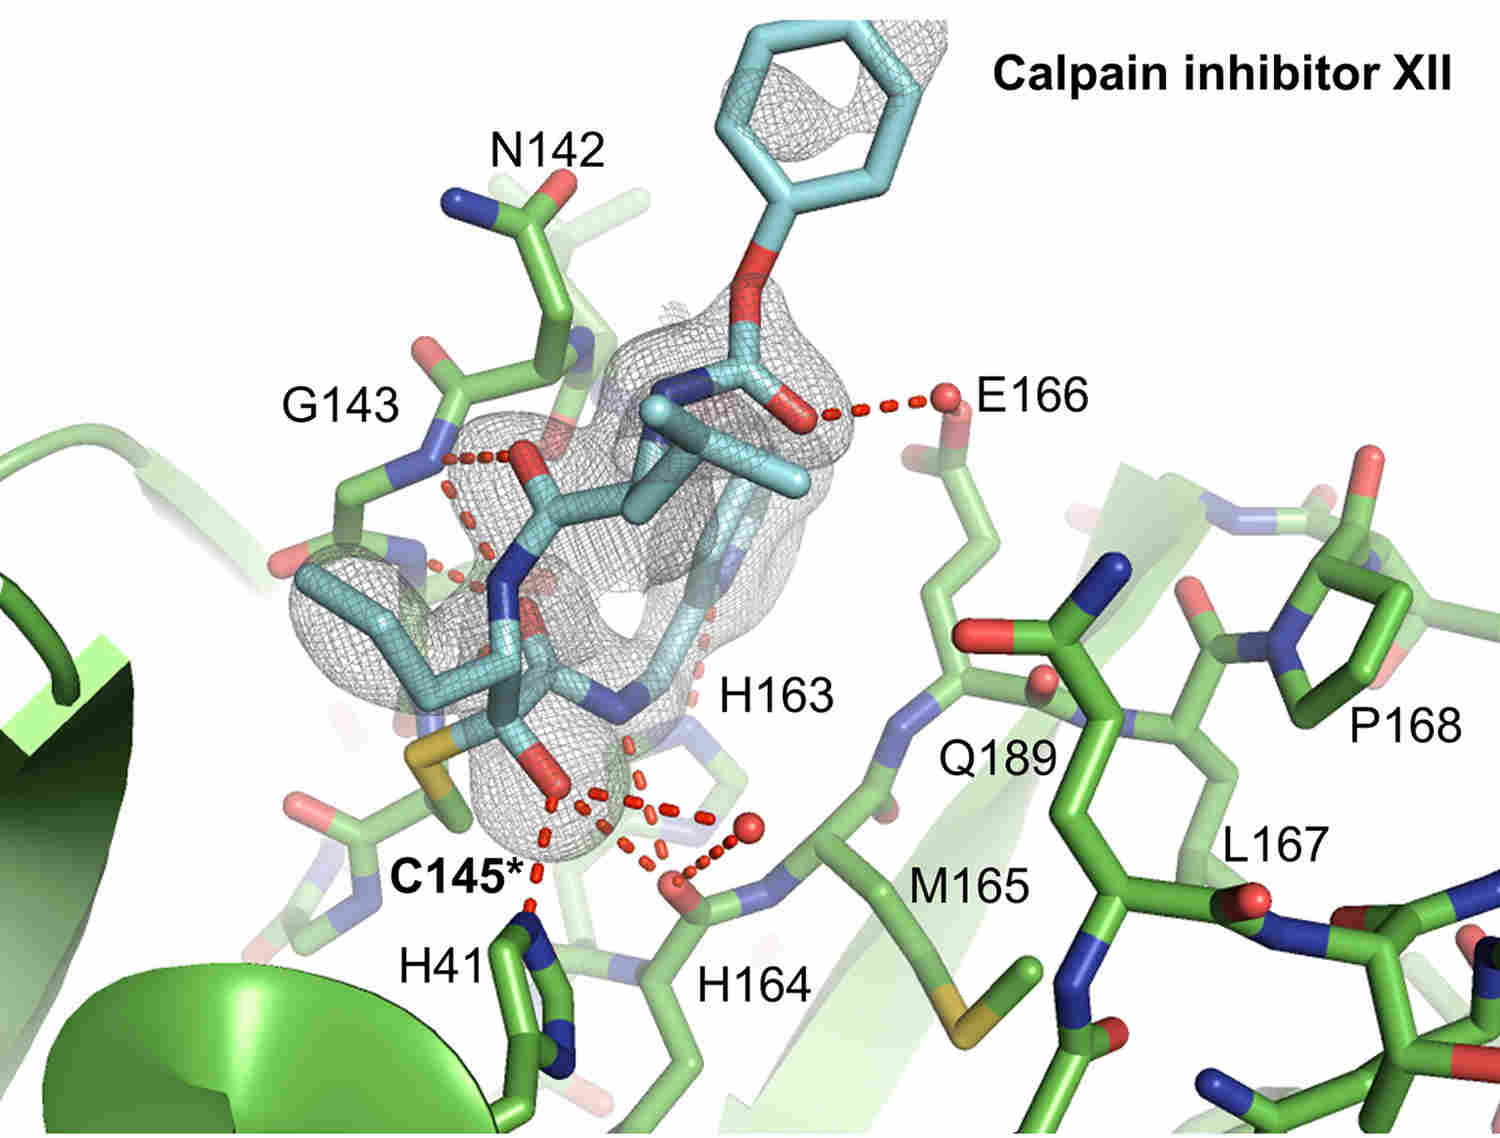 Study reveals strategy to create COVID-19 drugs to inhibit virus's